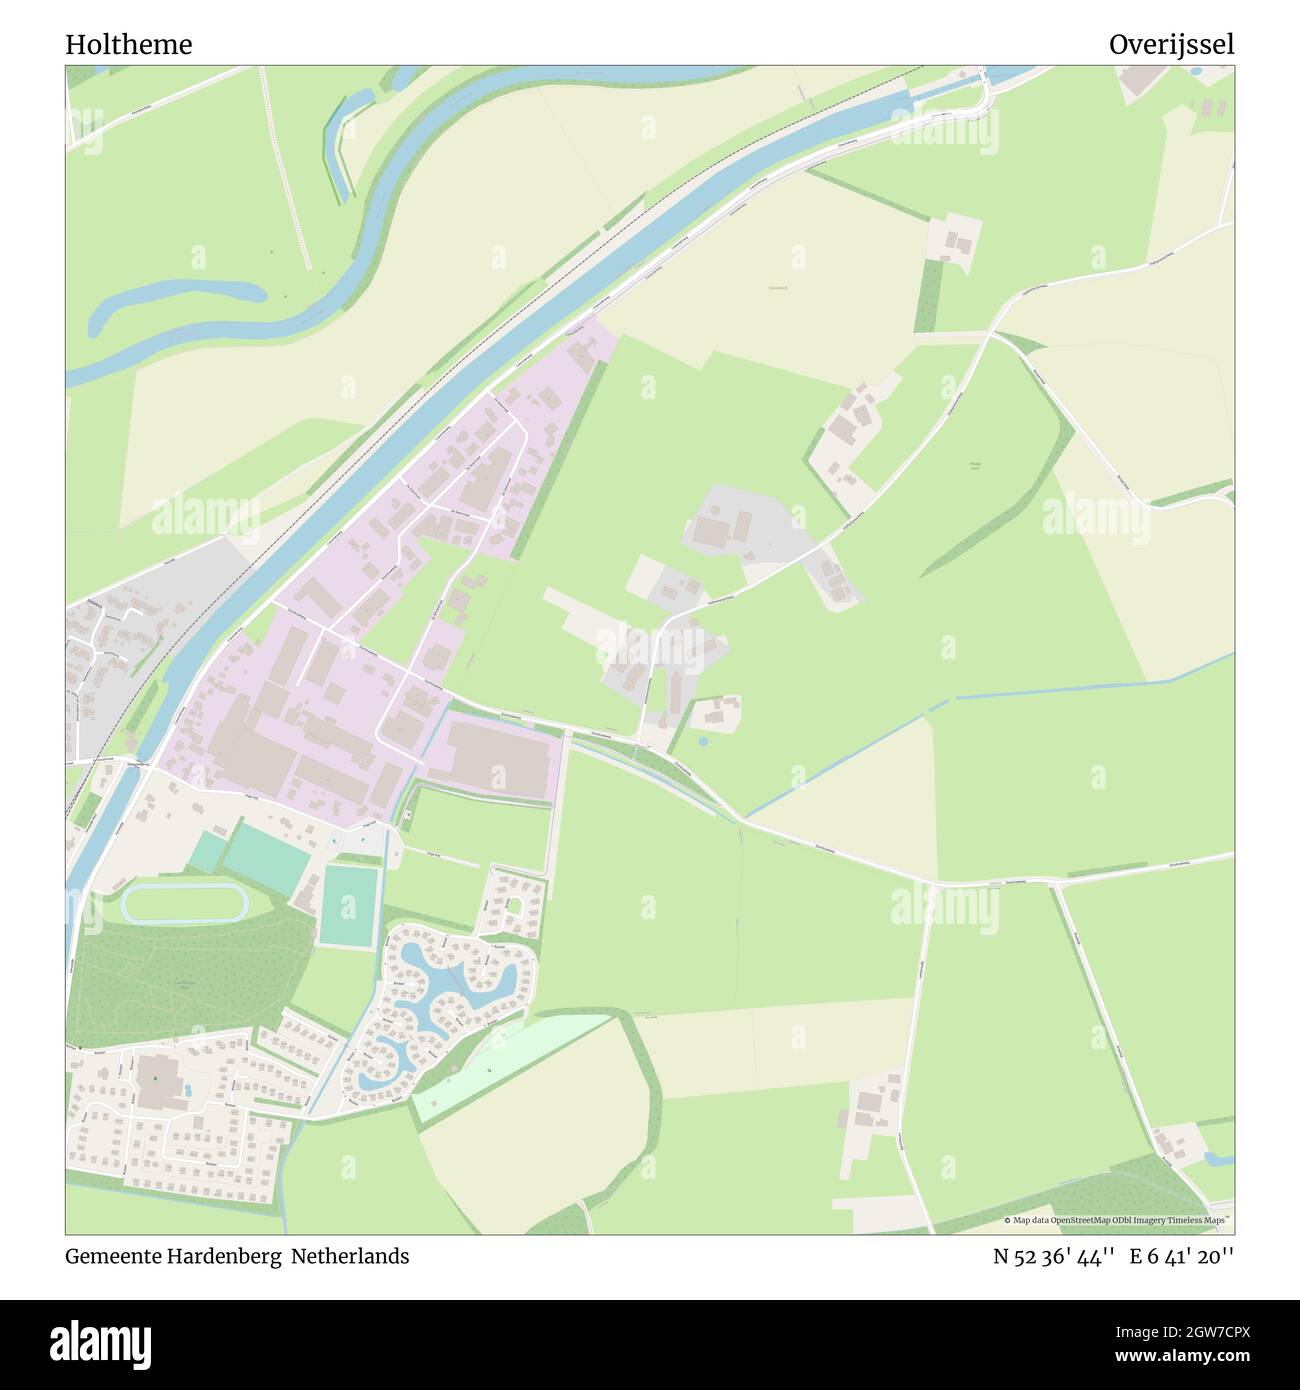 Holtheme, Gemeente Hardenberg, Netherlands, Overijssel, N 52 36' 44'', E 6 41' 20'', map, Timeless Map published in 2021. Travelers, explorers and adventurers like Florence Nightingale, David Livingstone, Ernest Shackleton, Lewis and Clark and Sherlock Holmes relied on maps to plan travels to the world's most remote corners, Timeless Maps is mapping most locations on the globe, showing the achievement of great dreams Stock Photo